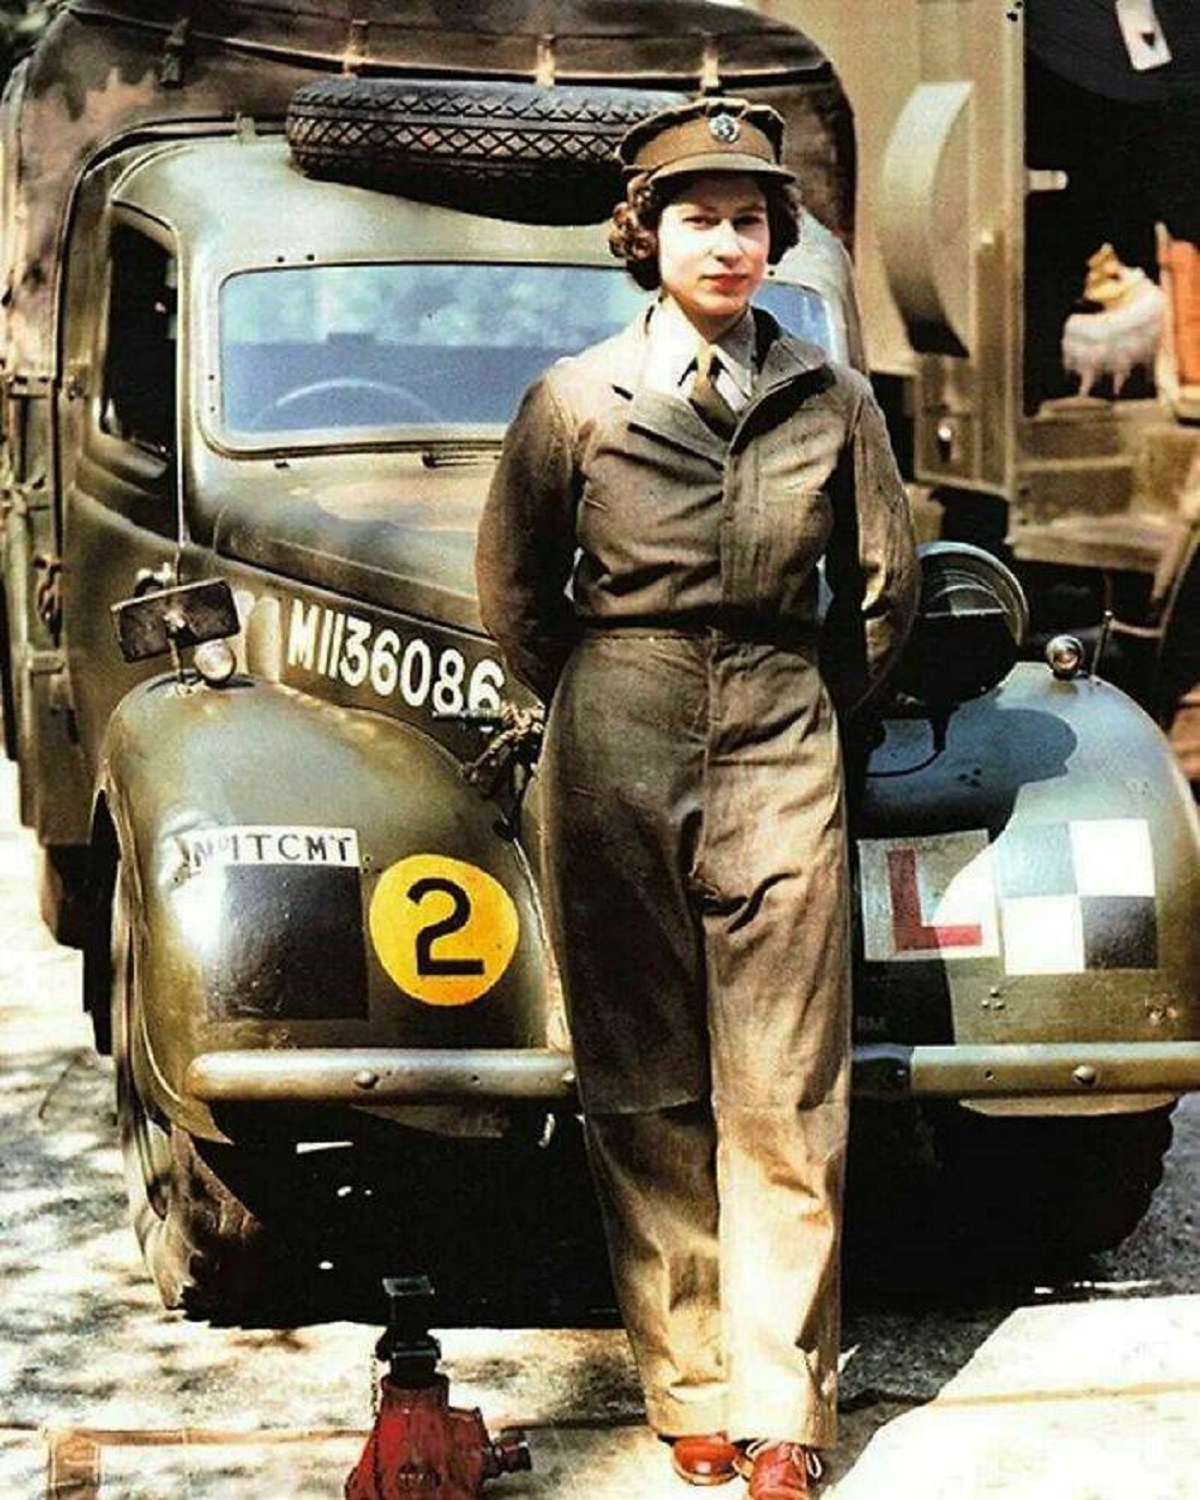 "Princess Elizabeth At 19 Years Of Age Is Seen In The Auxiliary Territorial Service In The 1945, During World War II"